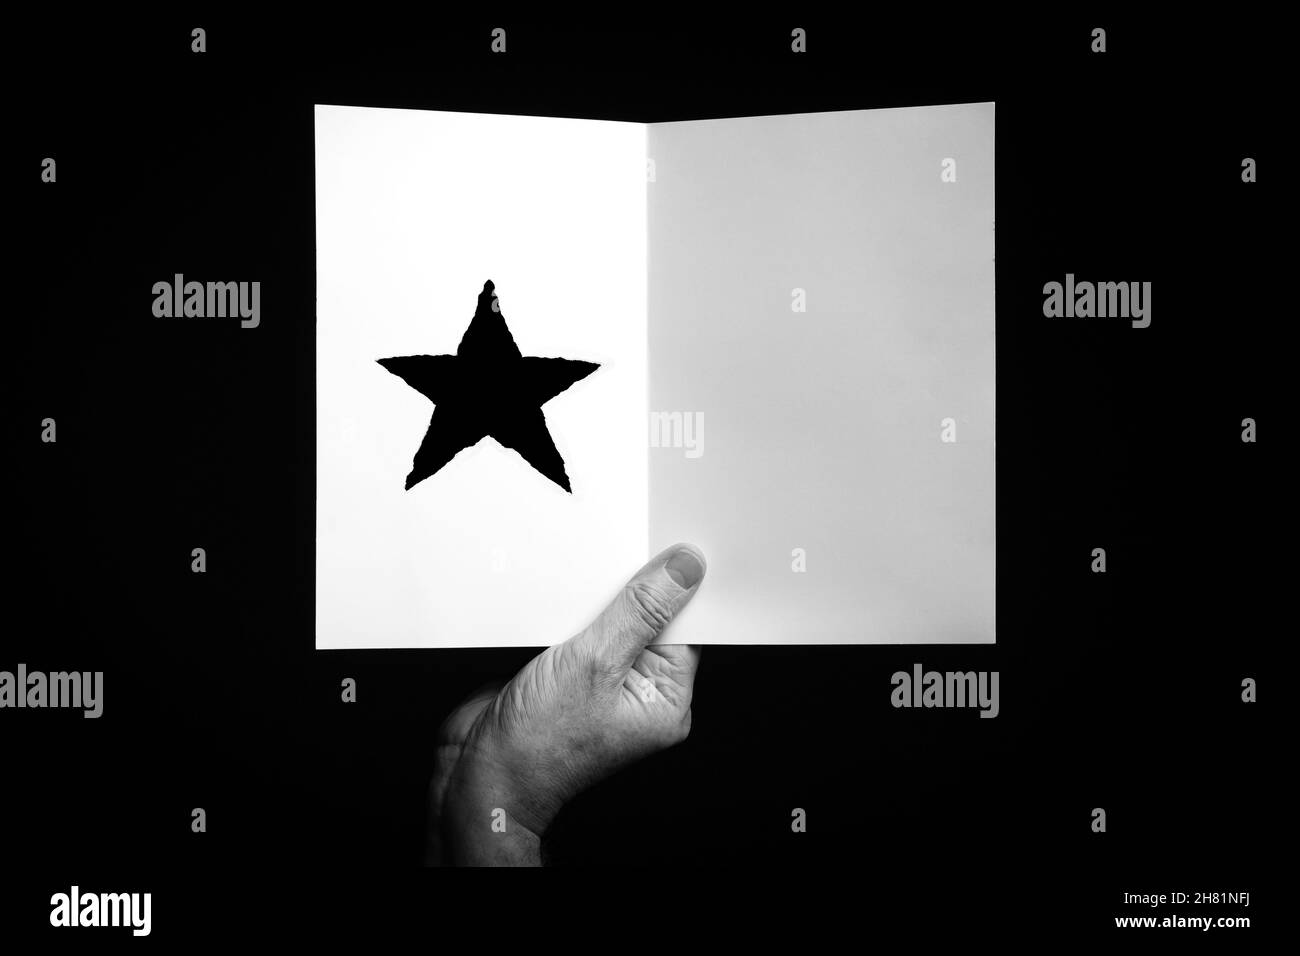 B+W image of male hand holding folded card with christmas star symbol against black background. Stock Photo